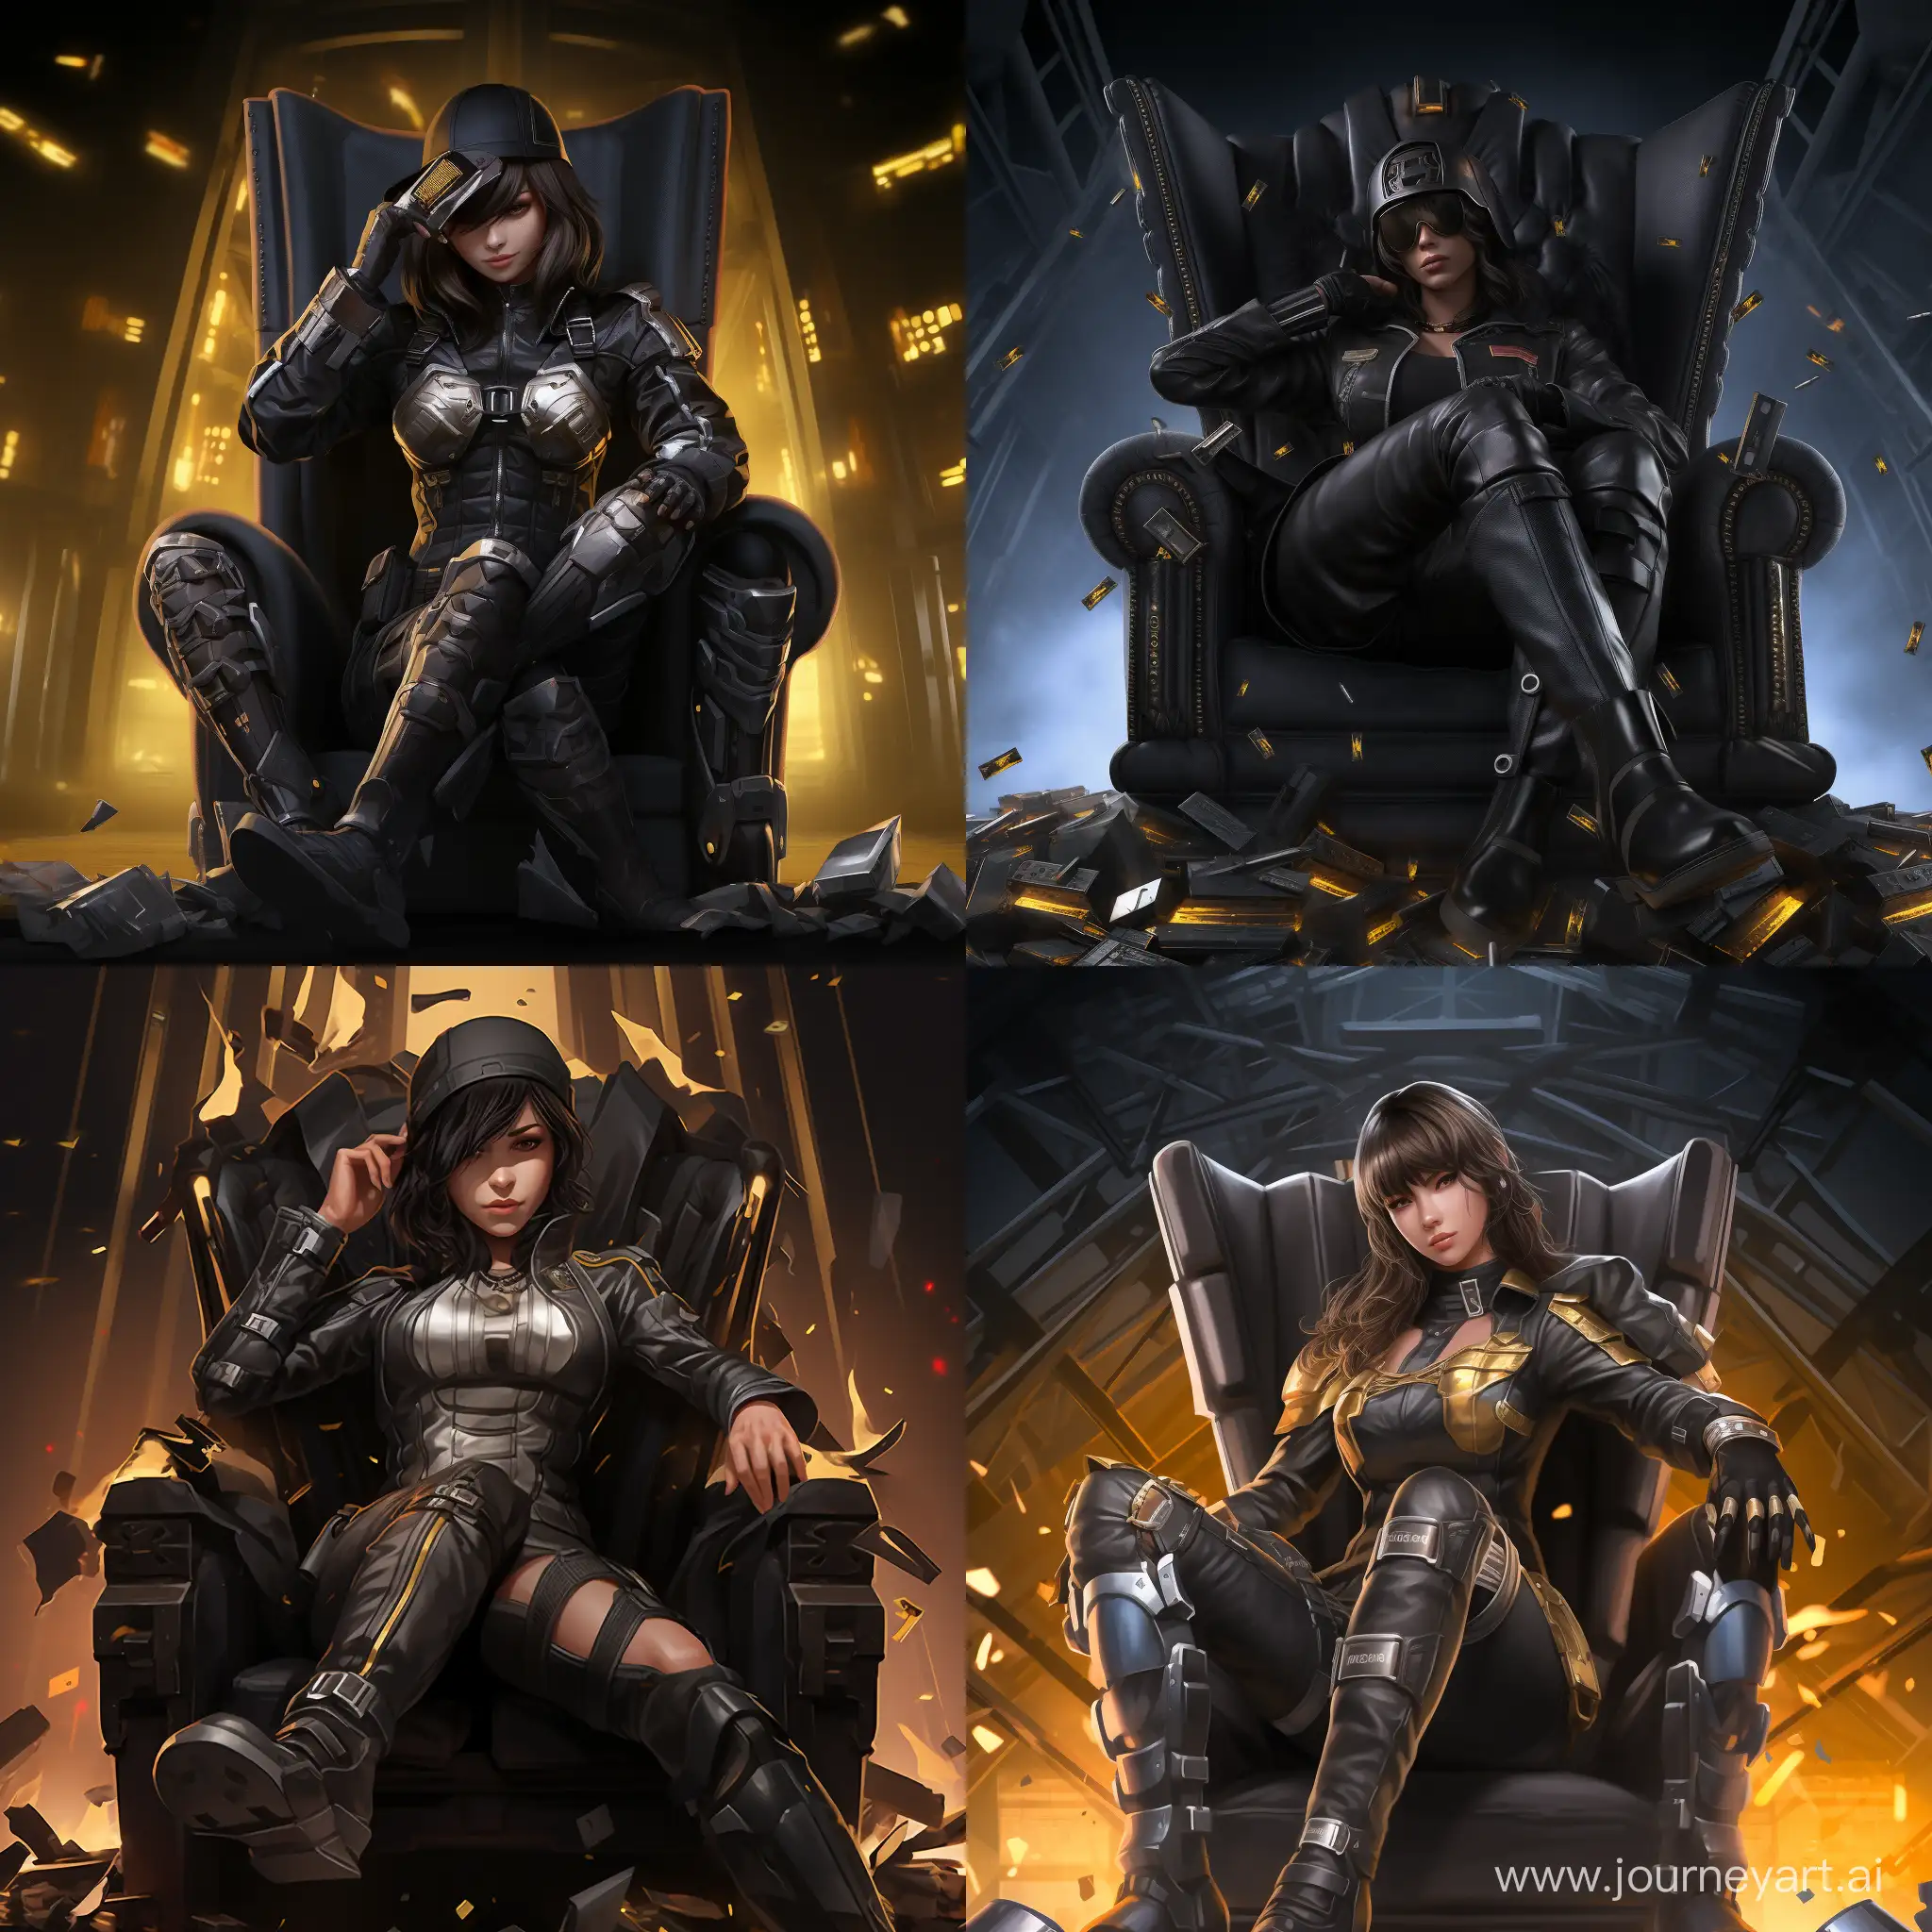 Create image  in which girl character from the game pubg mobile, with 3 level body armor and with an armored helmet covering her face, she sits on a chair in a royal pose with her left leg crossed over her right on the chair of the throne and falling from sky miilions the game currency unknown cash is falling behind her.